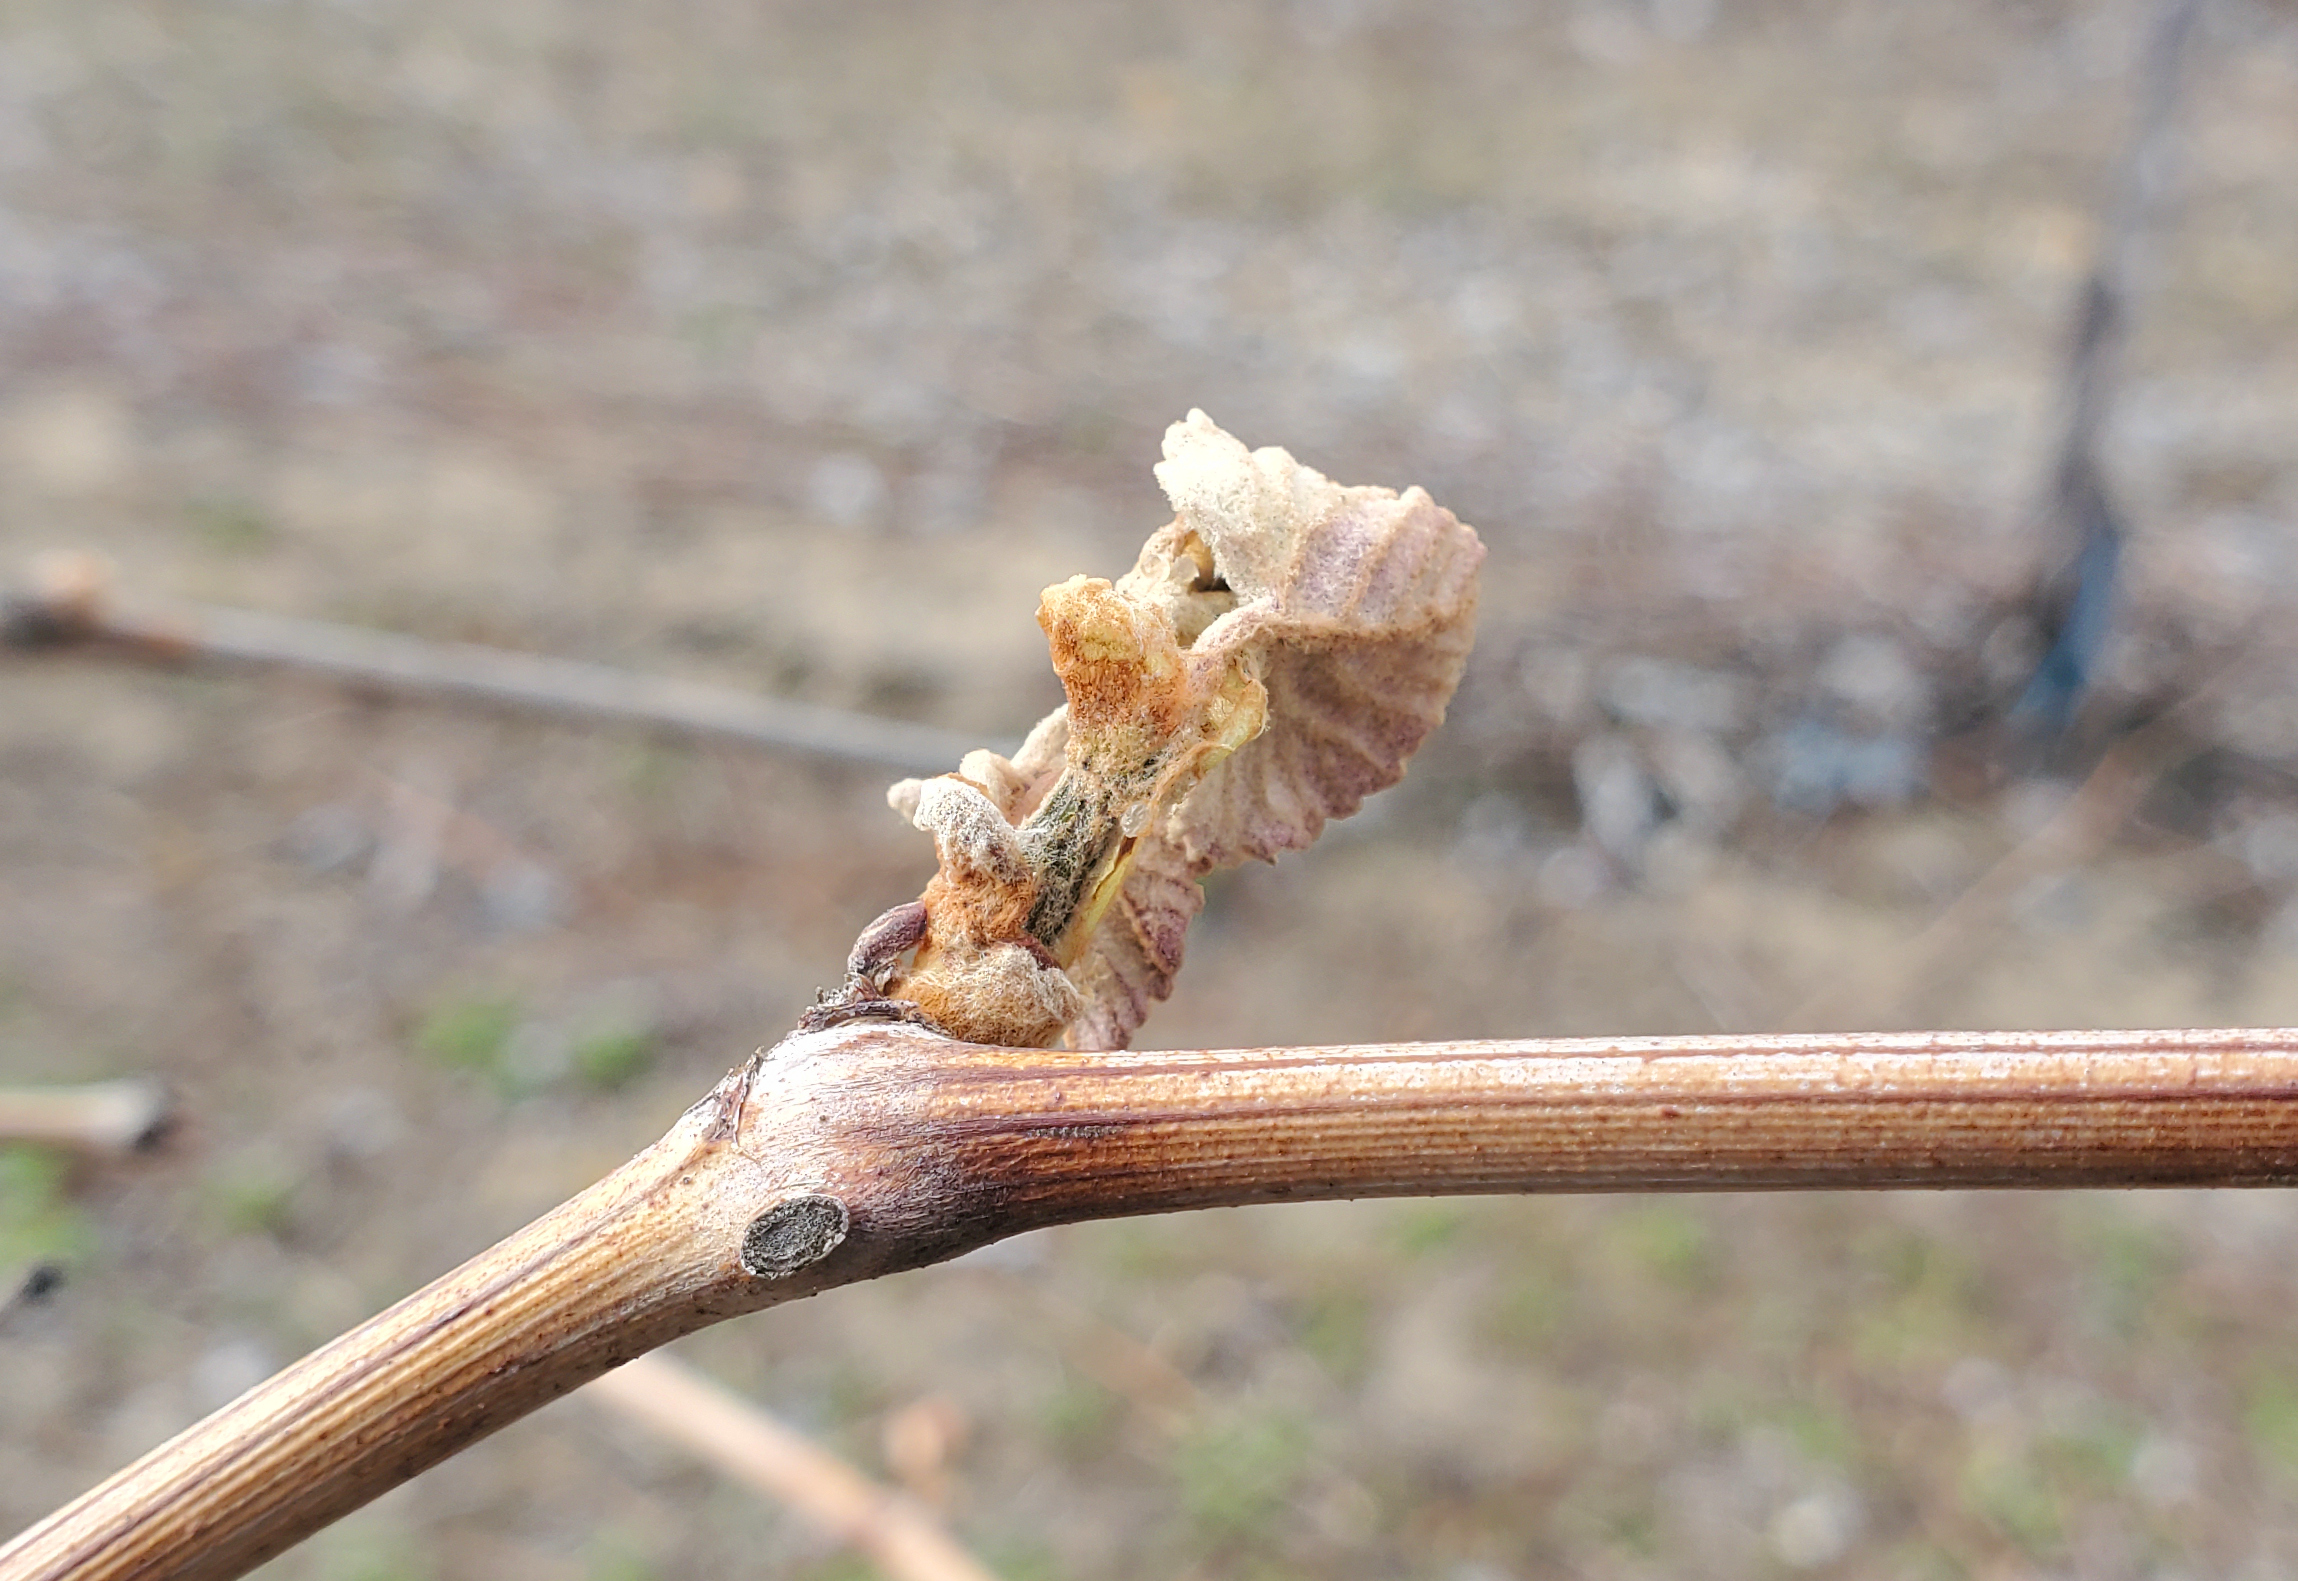 Grape with frost damage.